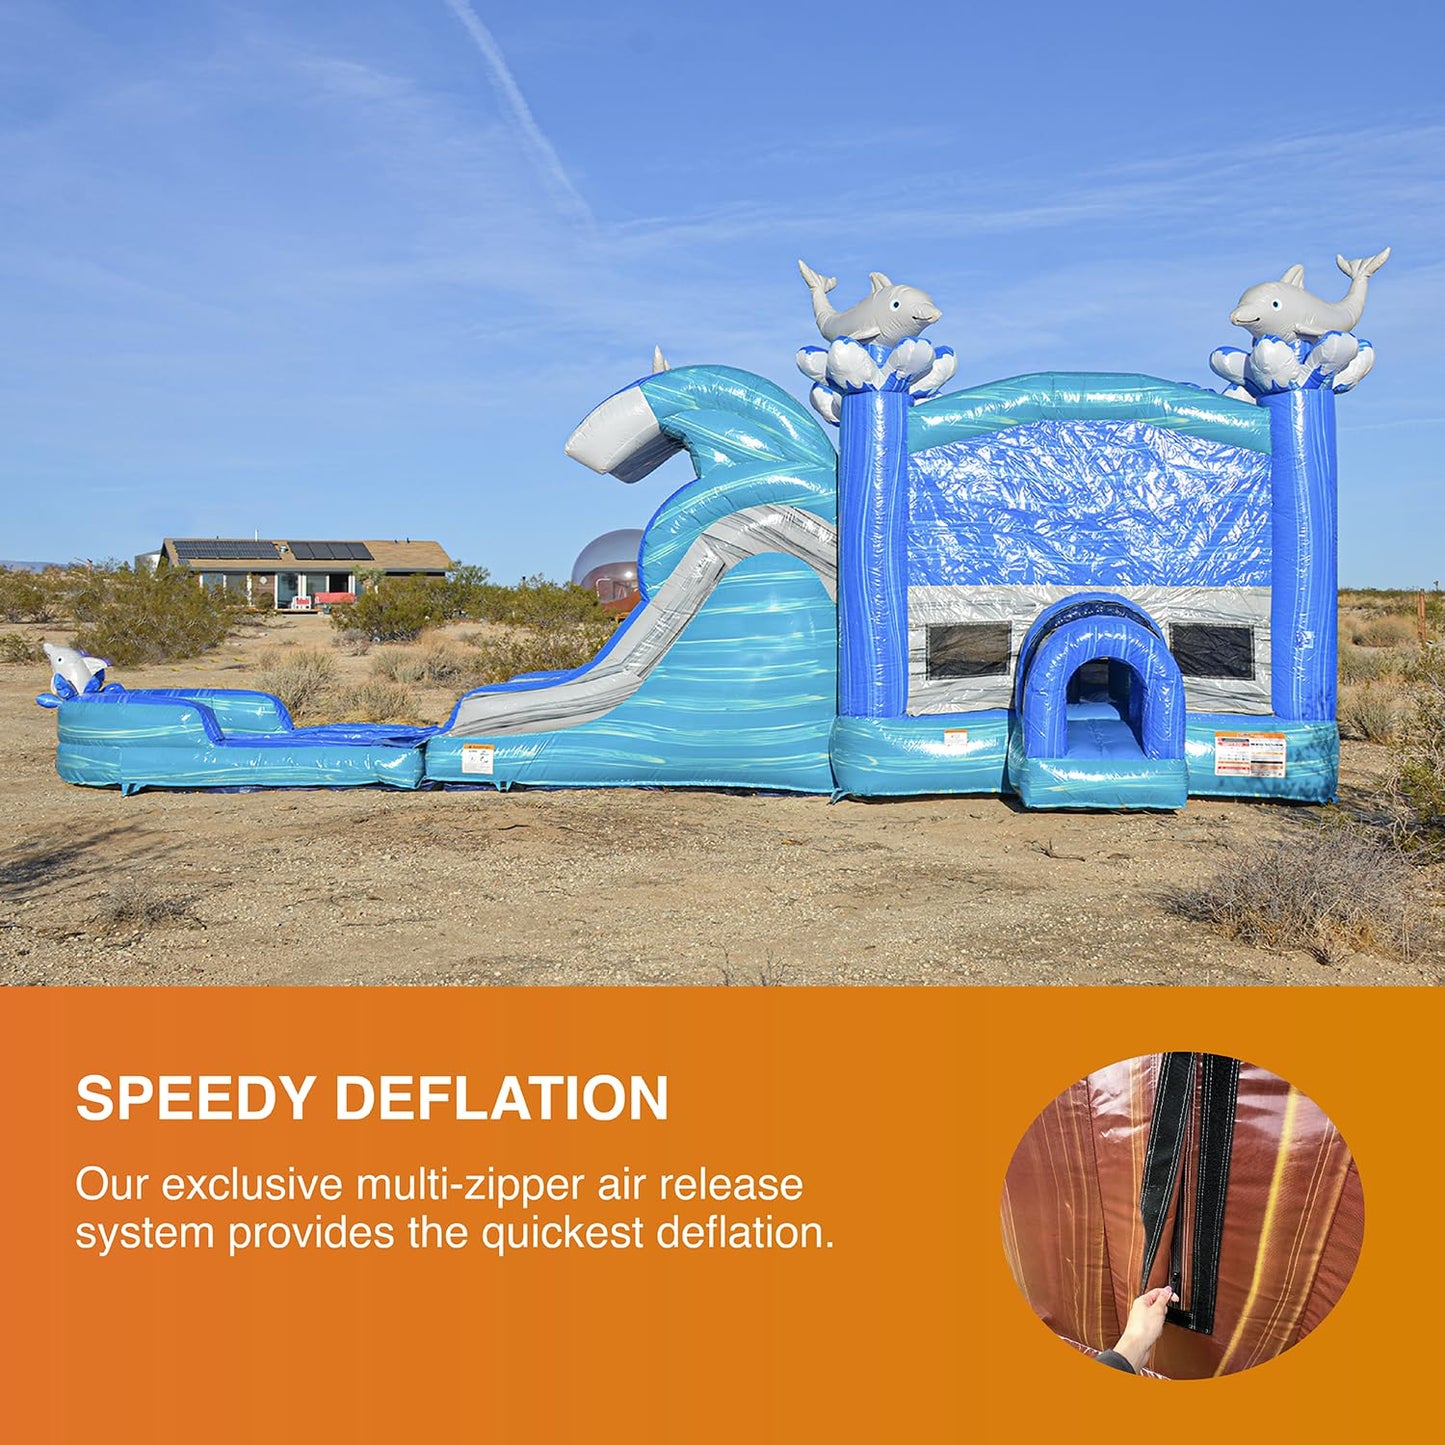 JumpOrange Dolphins Commercial Grade Bounce House Water Slide with Dual Lane and Detachable Pool for Kids and Adults (with Blower), Tunnel Entrance, Basketball Hoop, Wet Dry Use, Obstacle Pop Ups